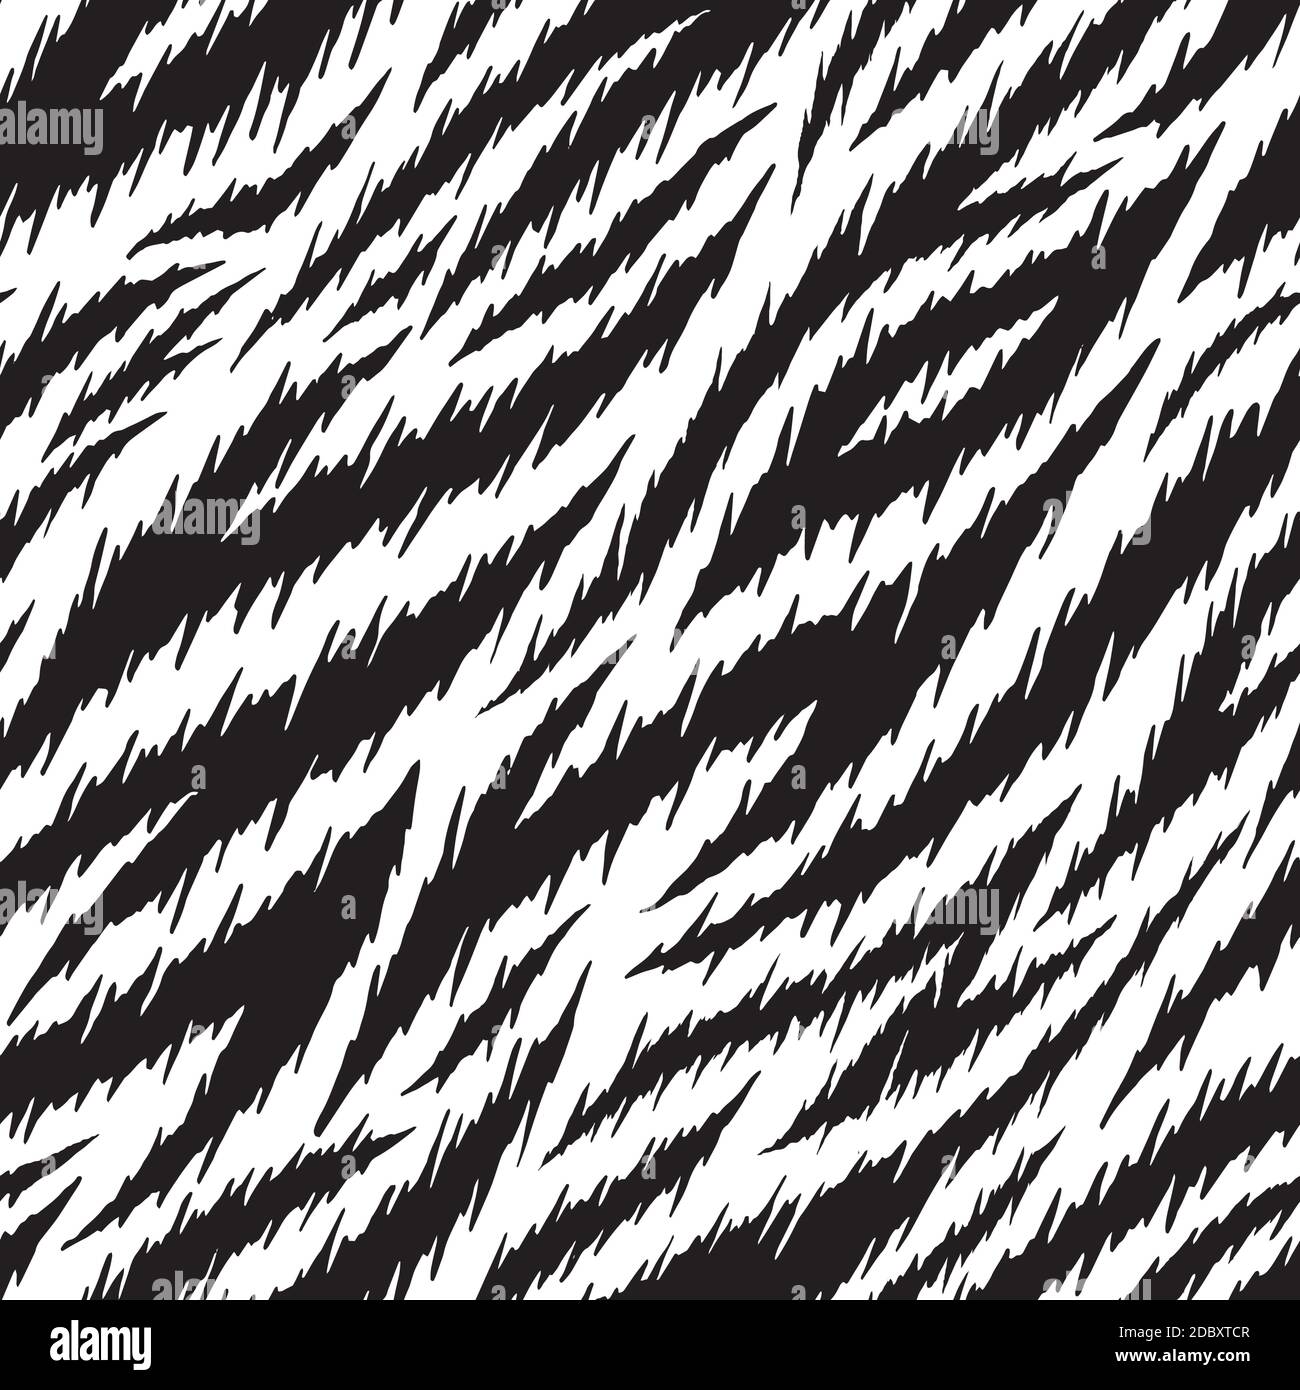 Tiger stripes seamless pattern. Vector illustration background for surface, t shirt design, print, poster, icon, web, graphic designs. Stock Vector